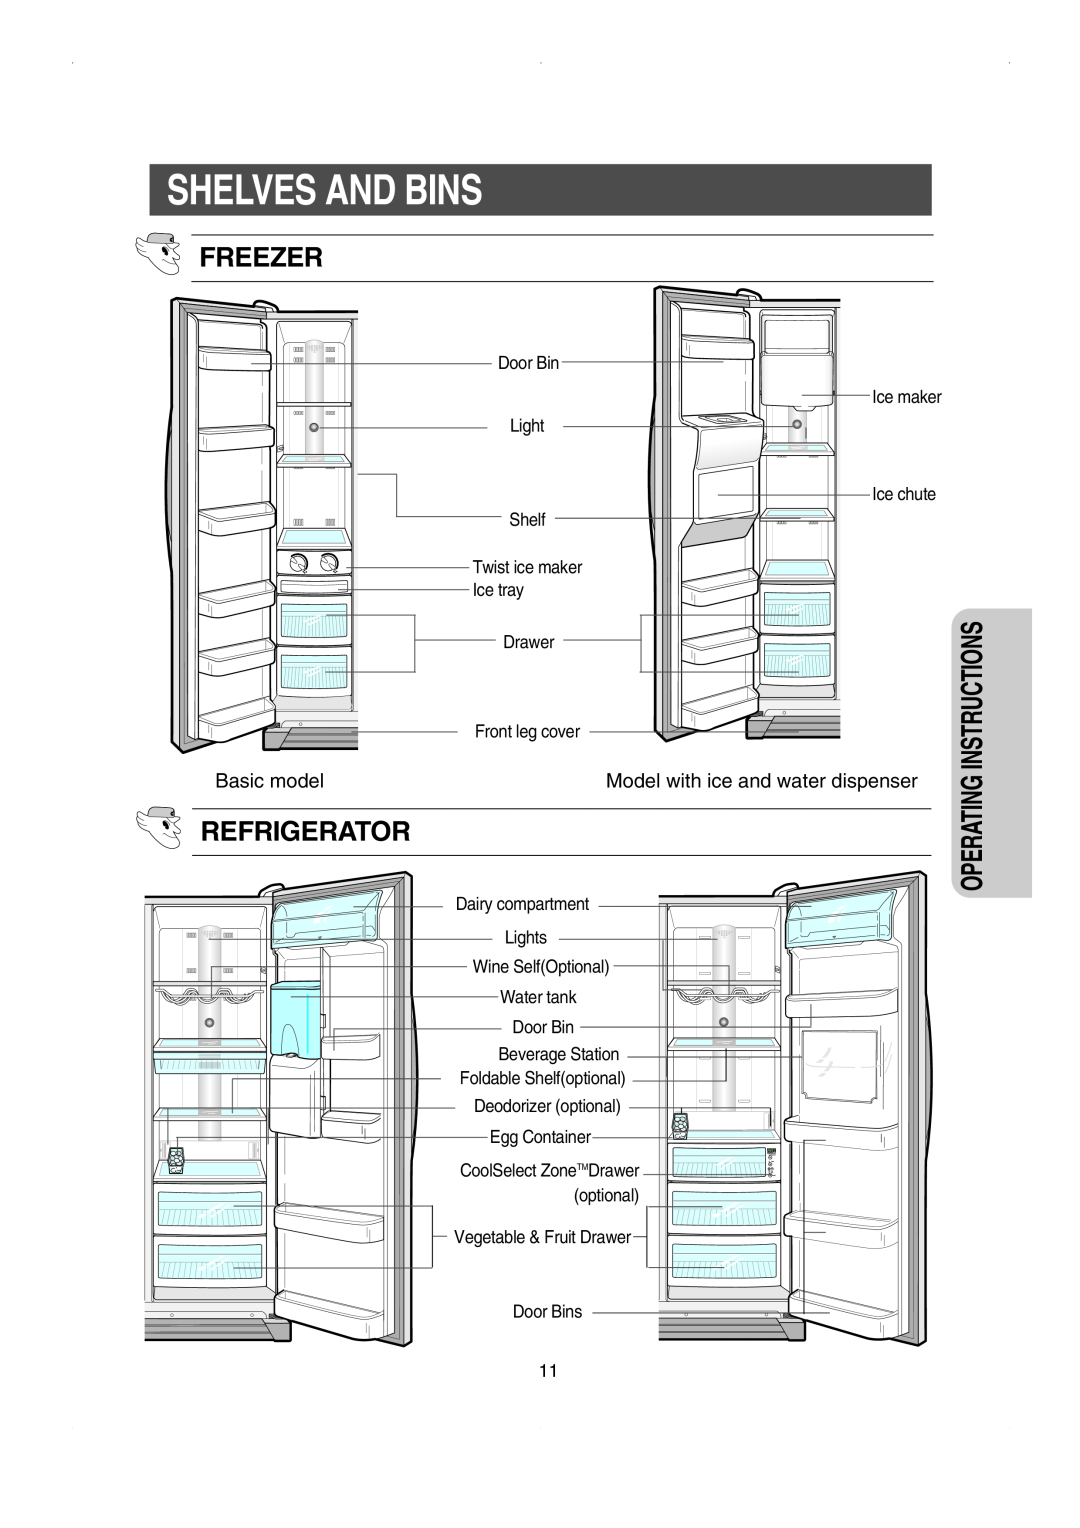 Samsung RS23FESW owner manual Shelves And Bins, Freezer, Refrigerator, Basic model, Model with ice and water dispenser 